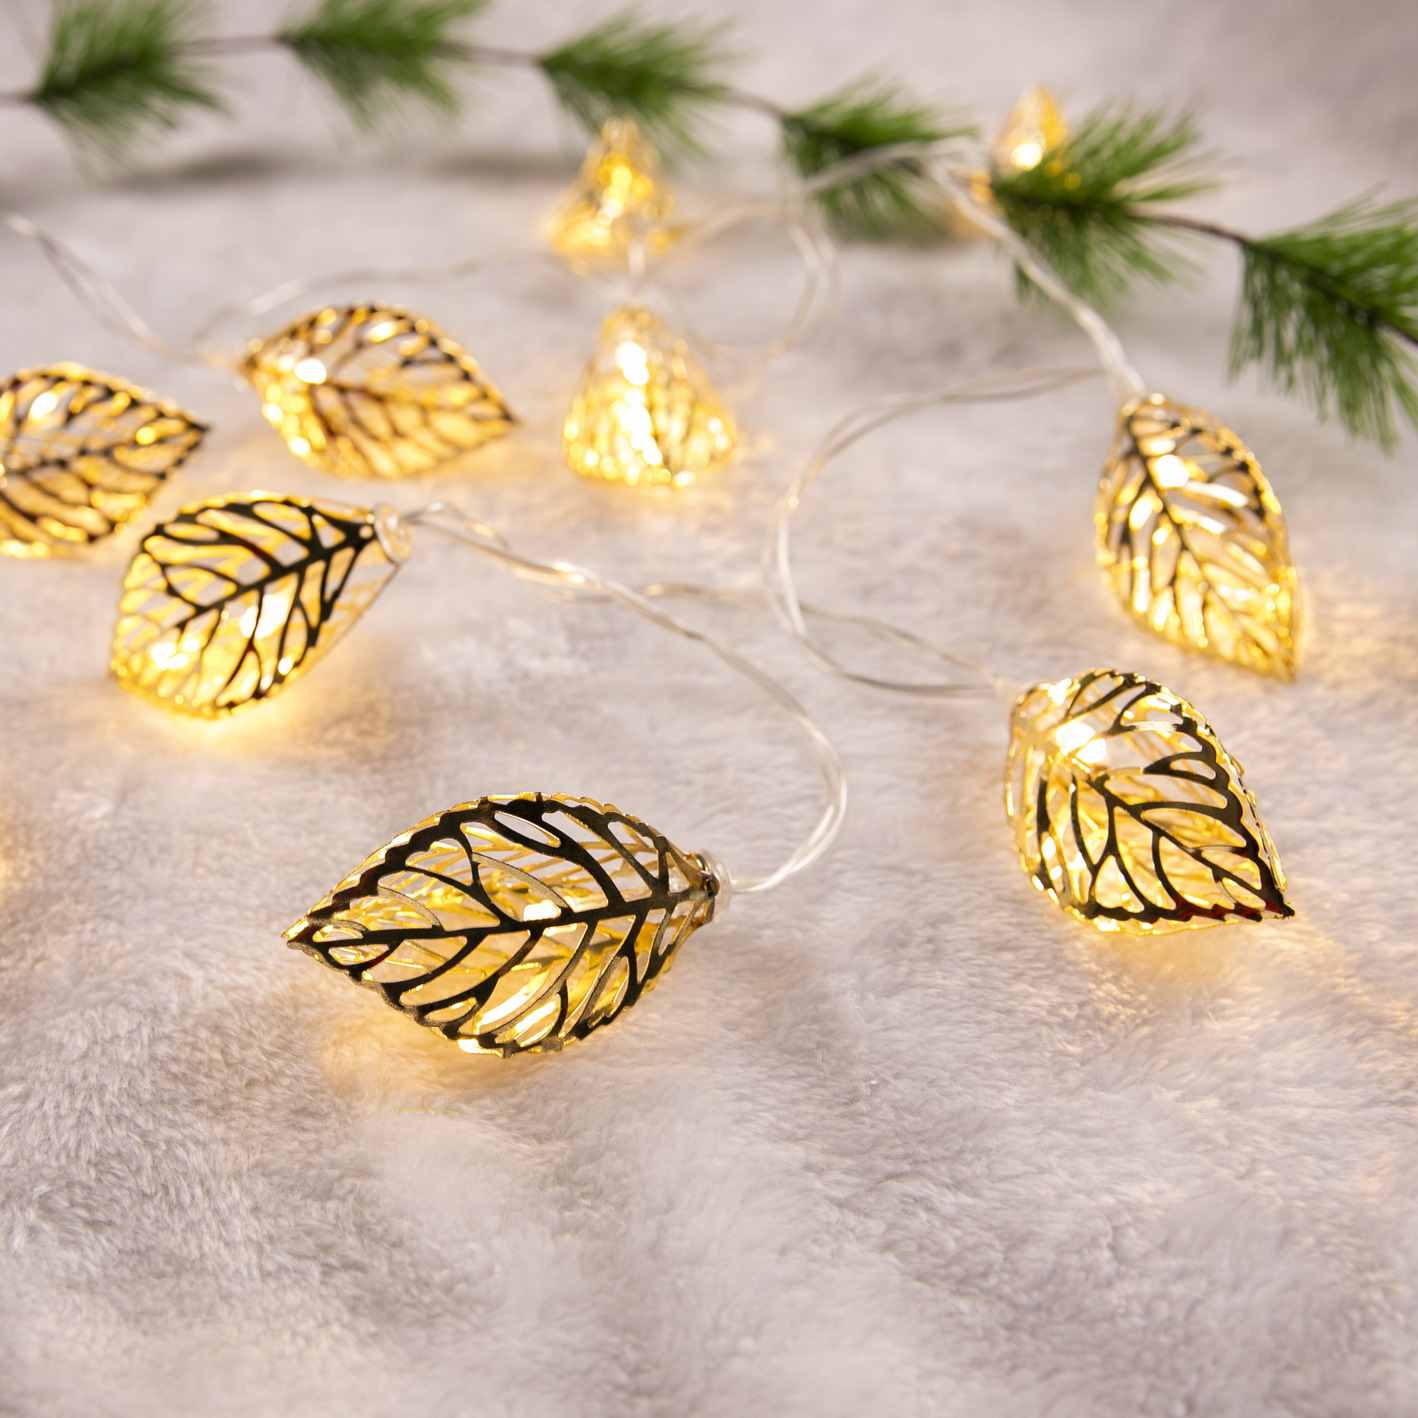 Chinese Professional Fairy Twinkle Lights -
 China Customized Metal Golden Leaf Christmas Fairy String Light For Holiday Decoration | ZHONGXIN – Zhongxin